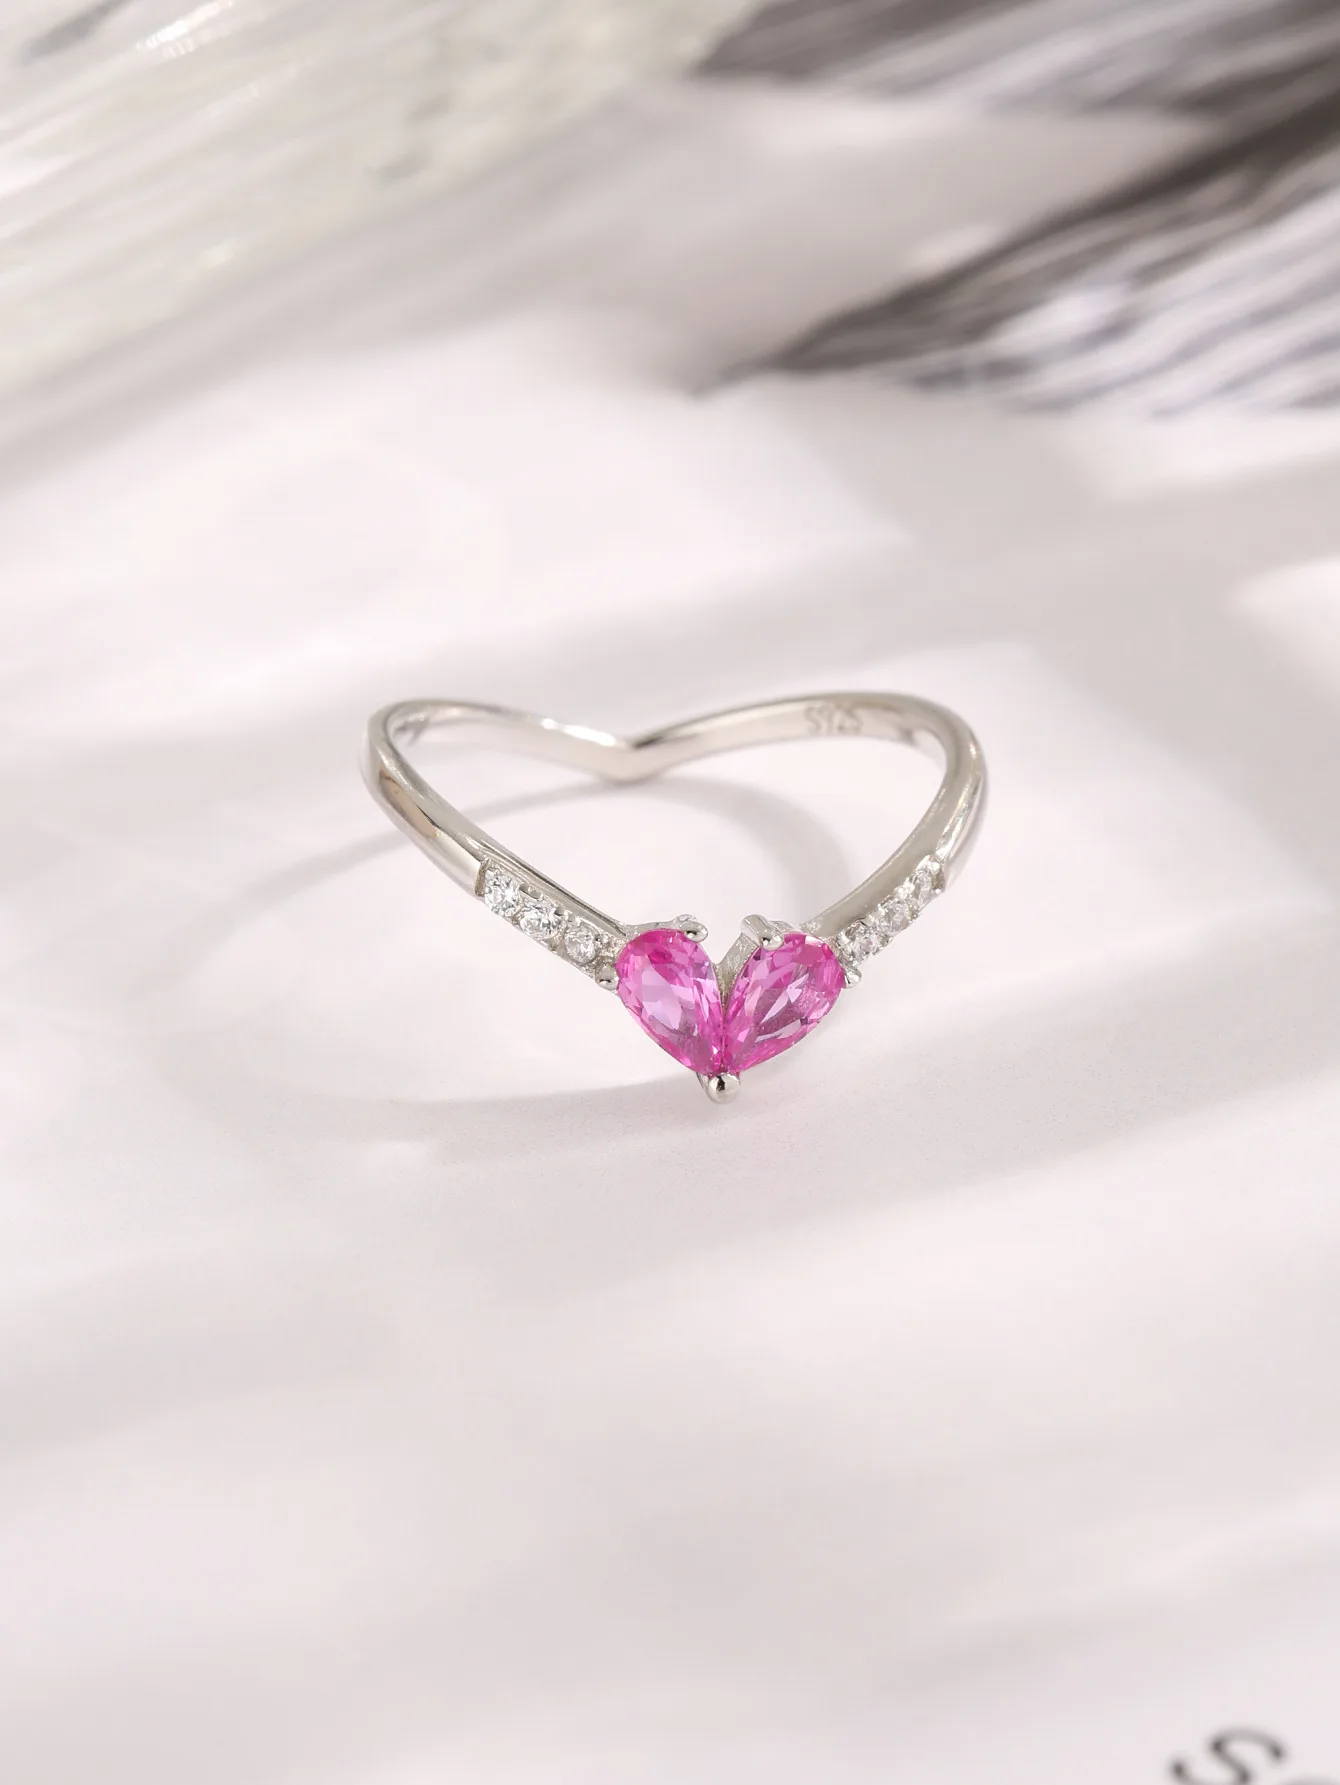 

Factory High Quality Sterling 925 Silver V-shaped Ring with Pink Gem and Zircons,Lovely Fashion Style for Couples or as a Gift